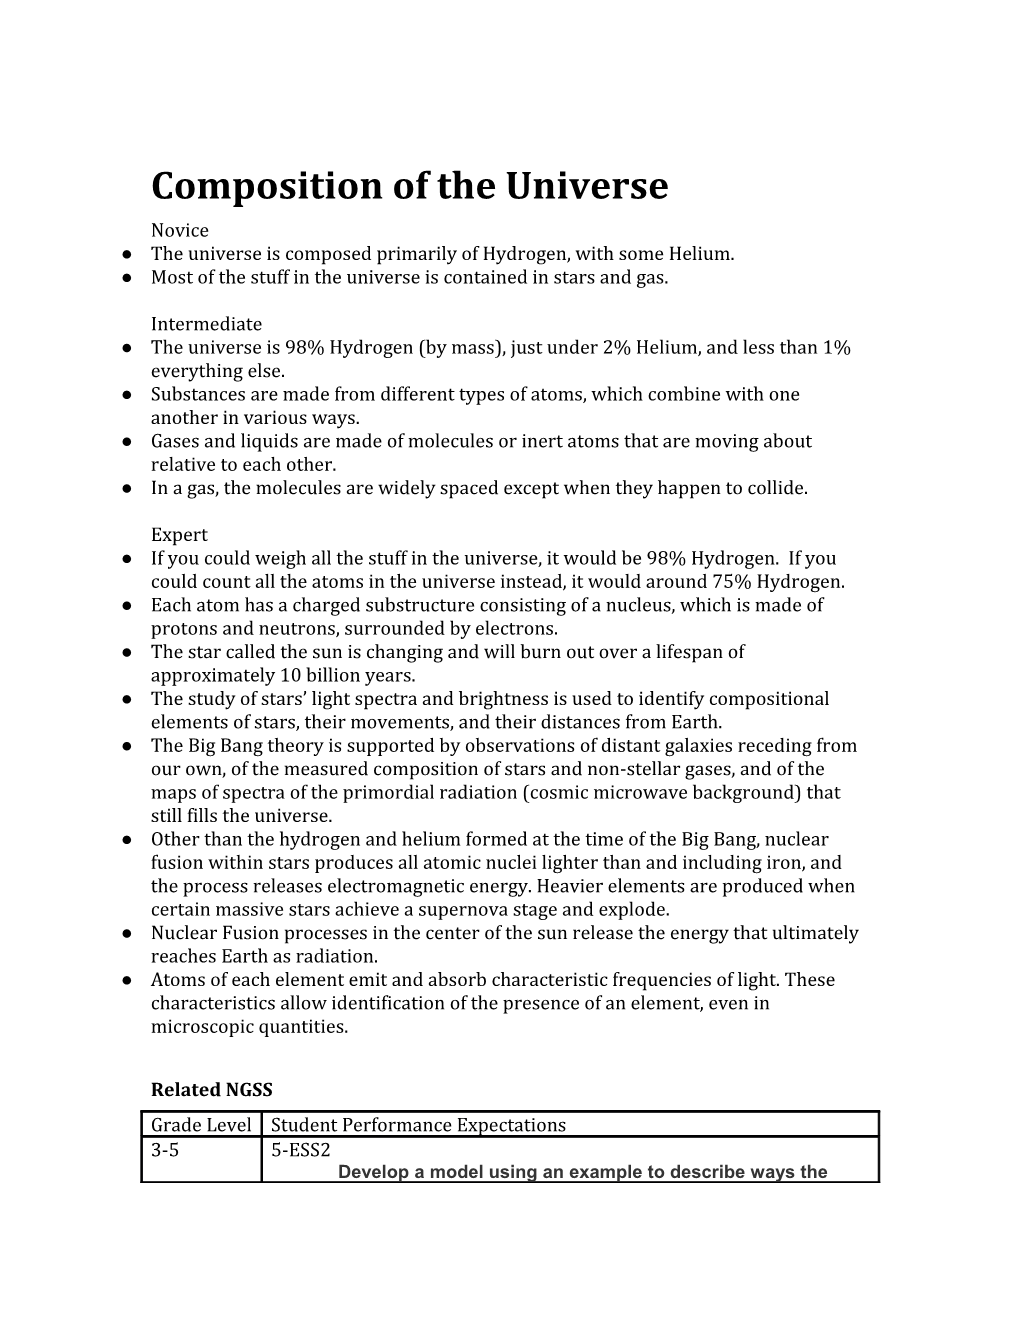 Composition of the Universe